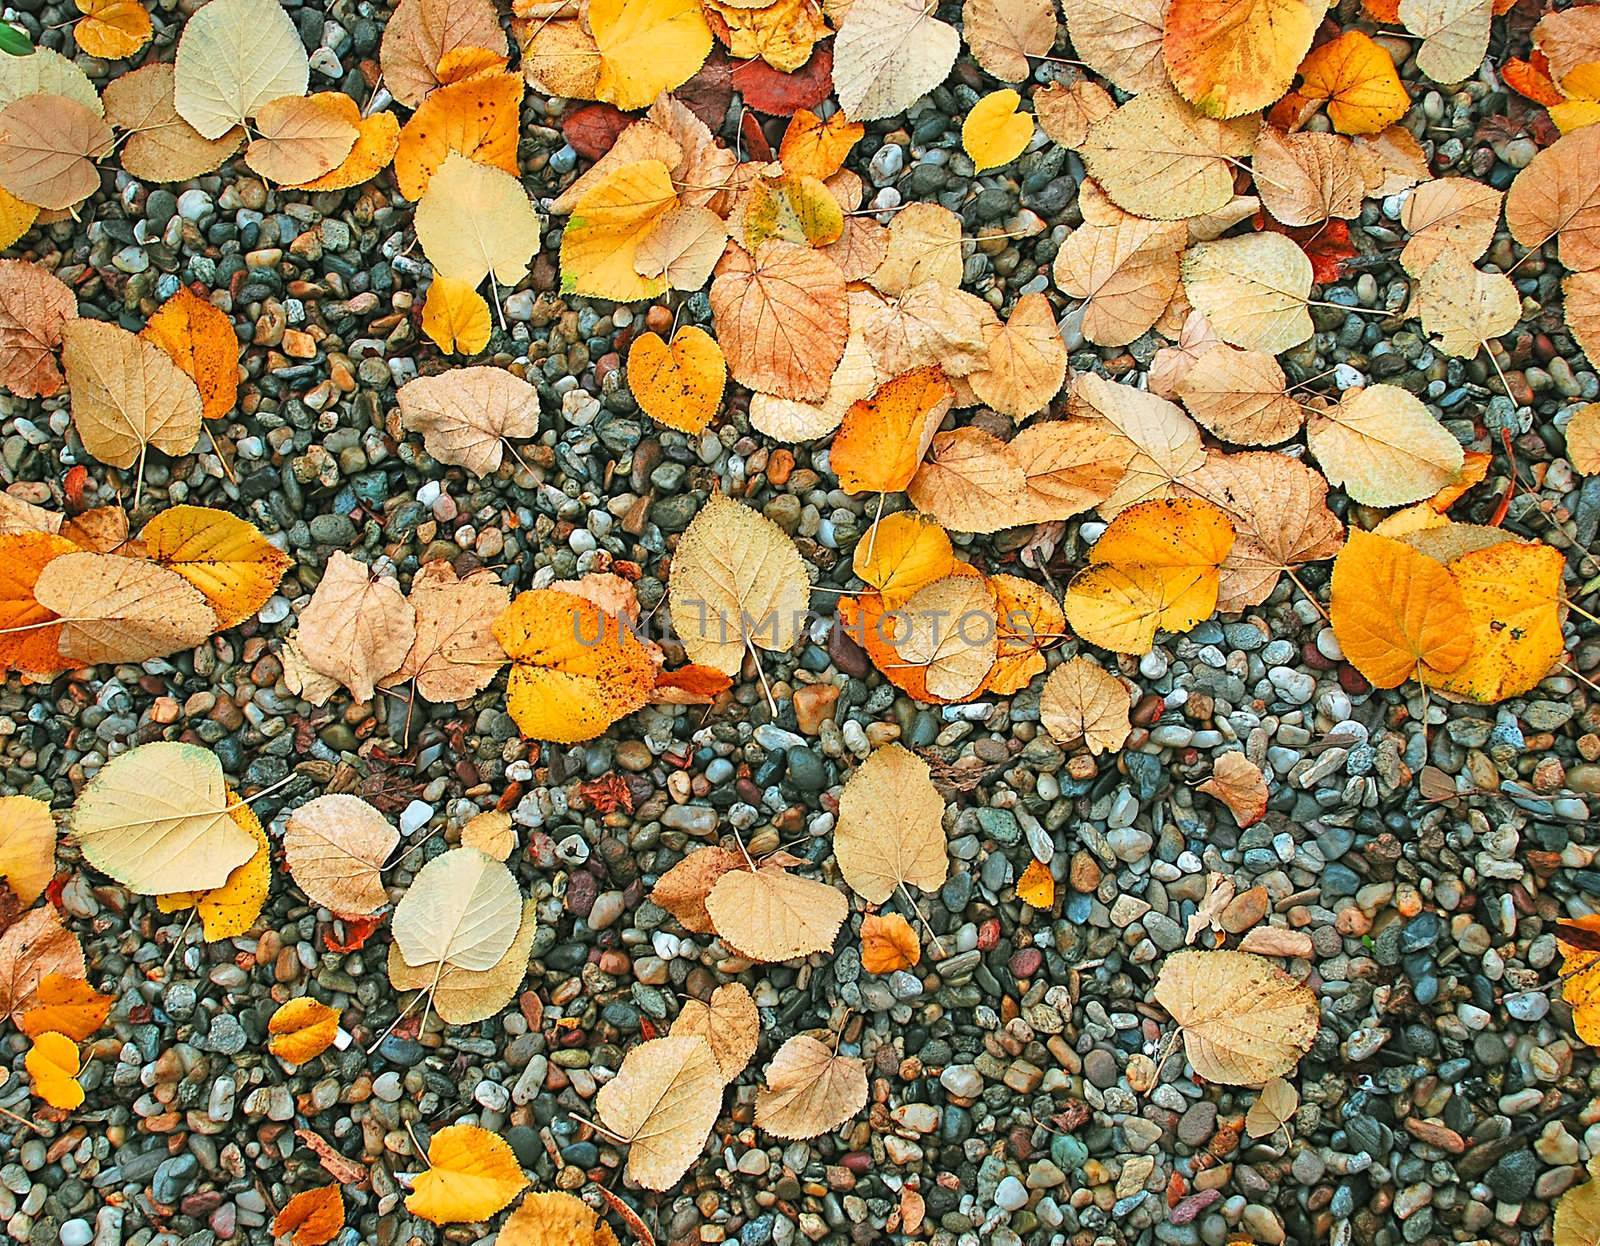 yellow and red wet autumn leaves over rocks